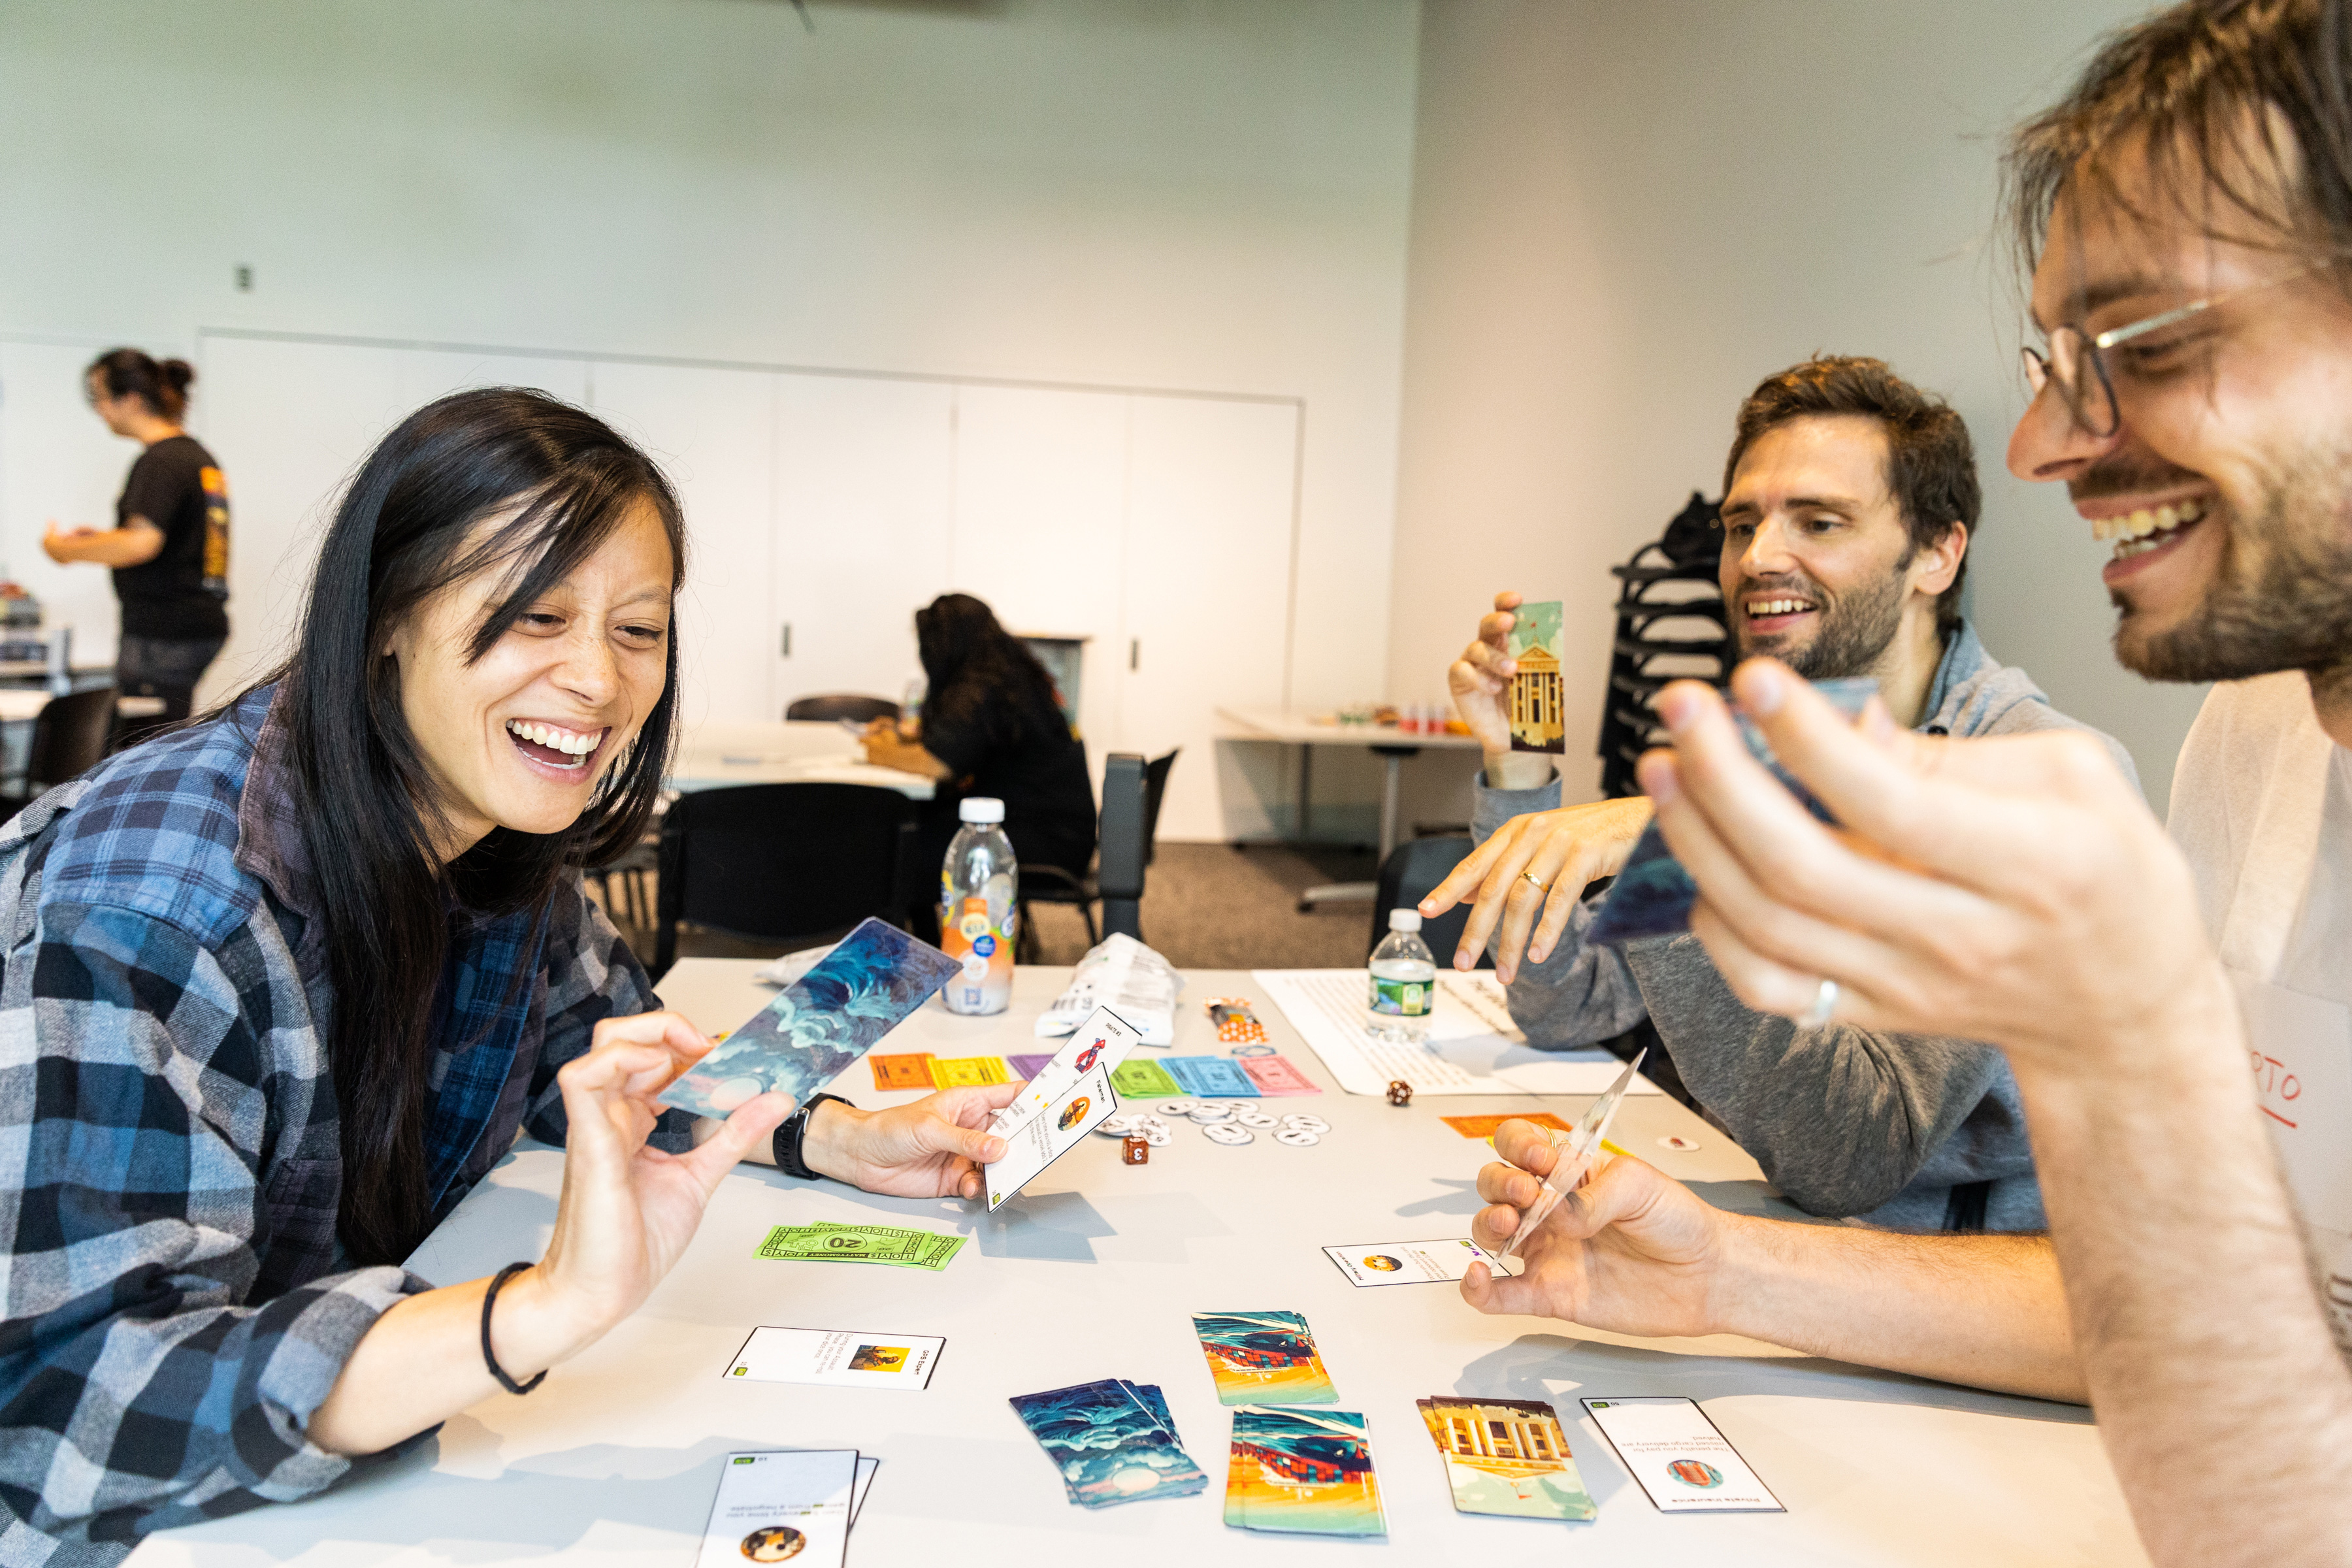 At a summer workshop in board game design, participants get a chance to design and play-test their own creations.